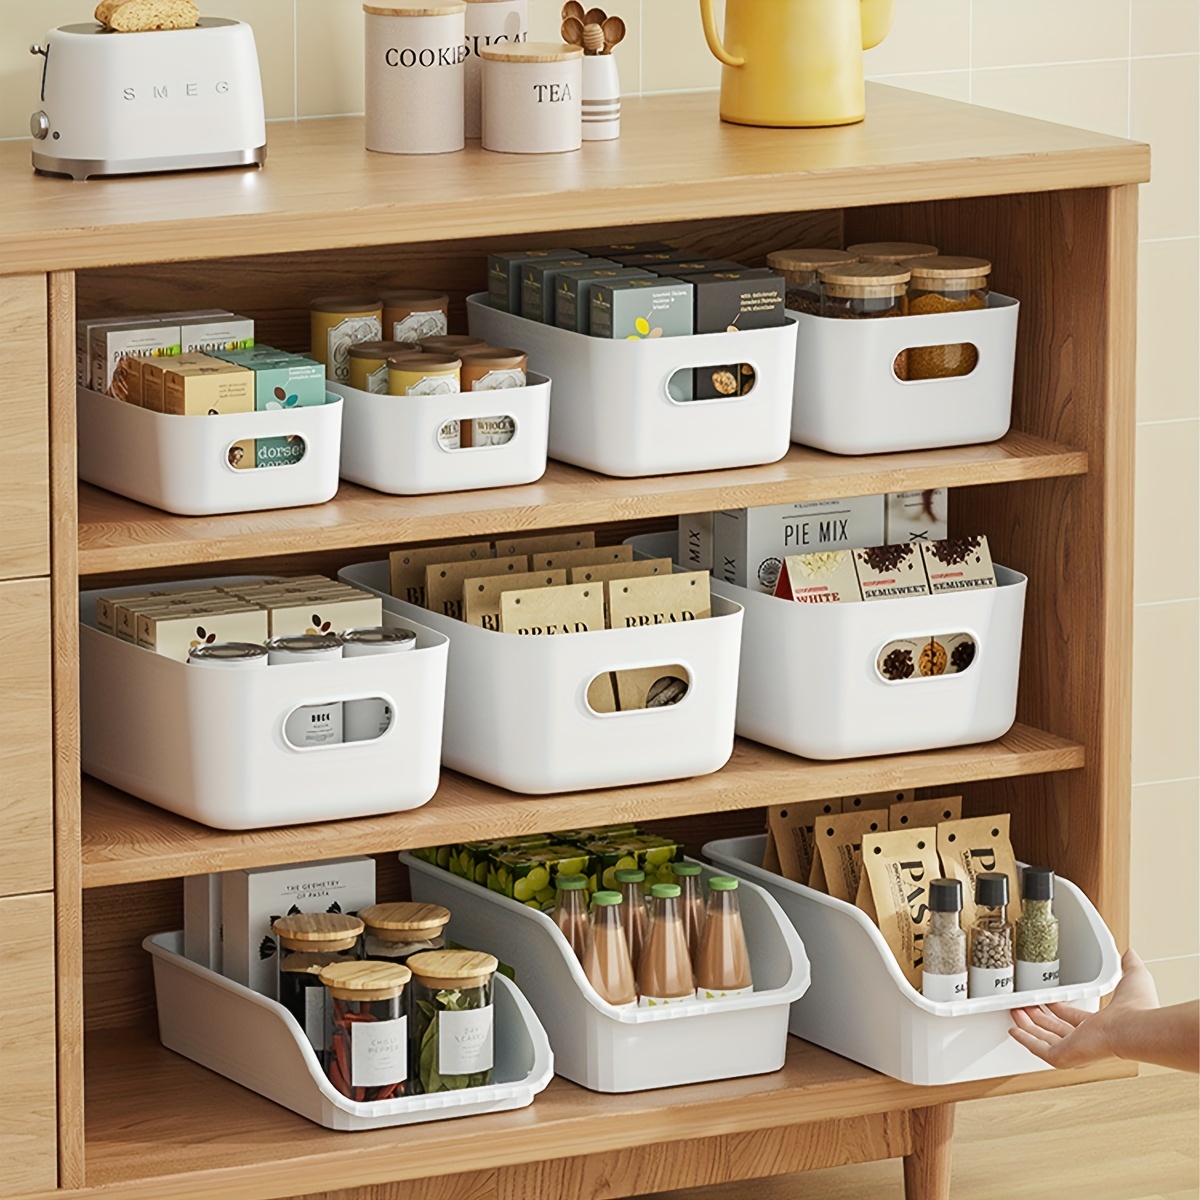 Storage with Lifewit Home Organisation Products - Daisies & Pie